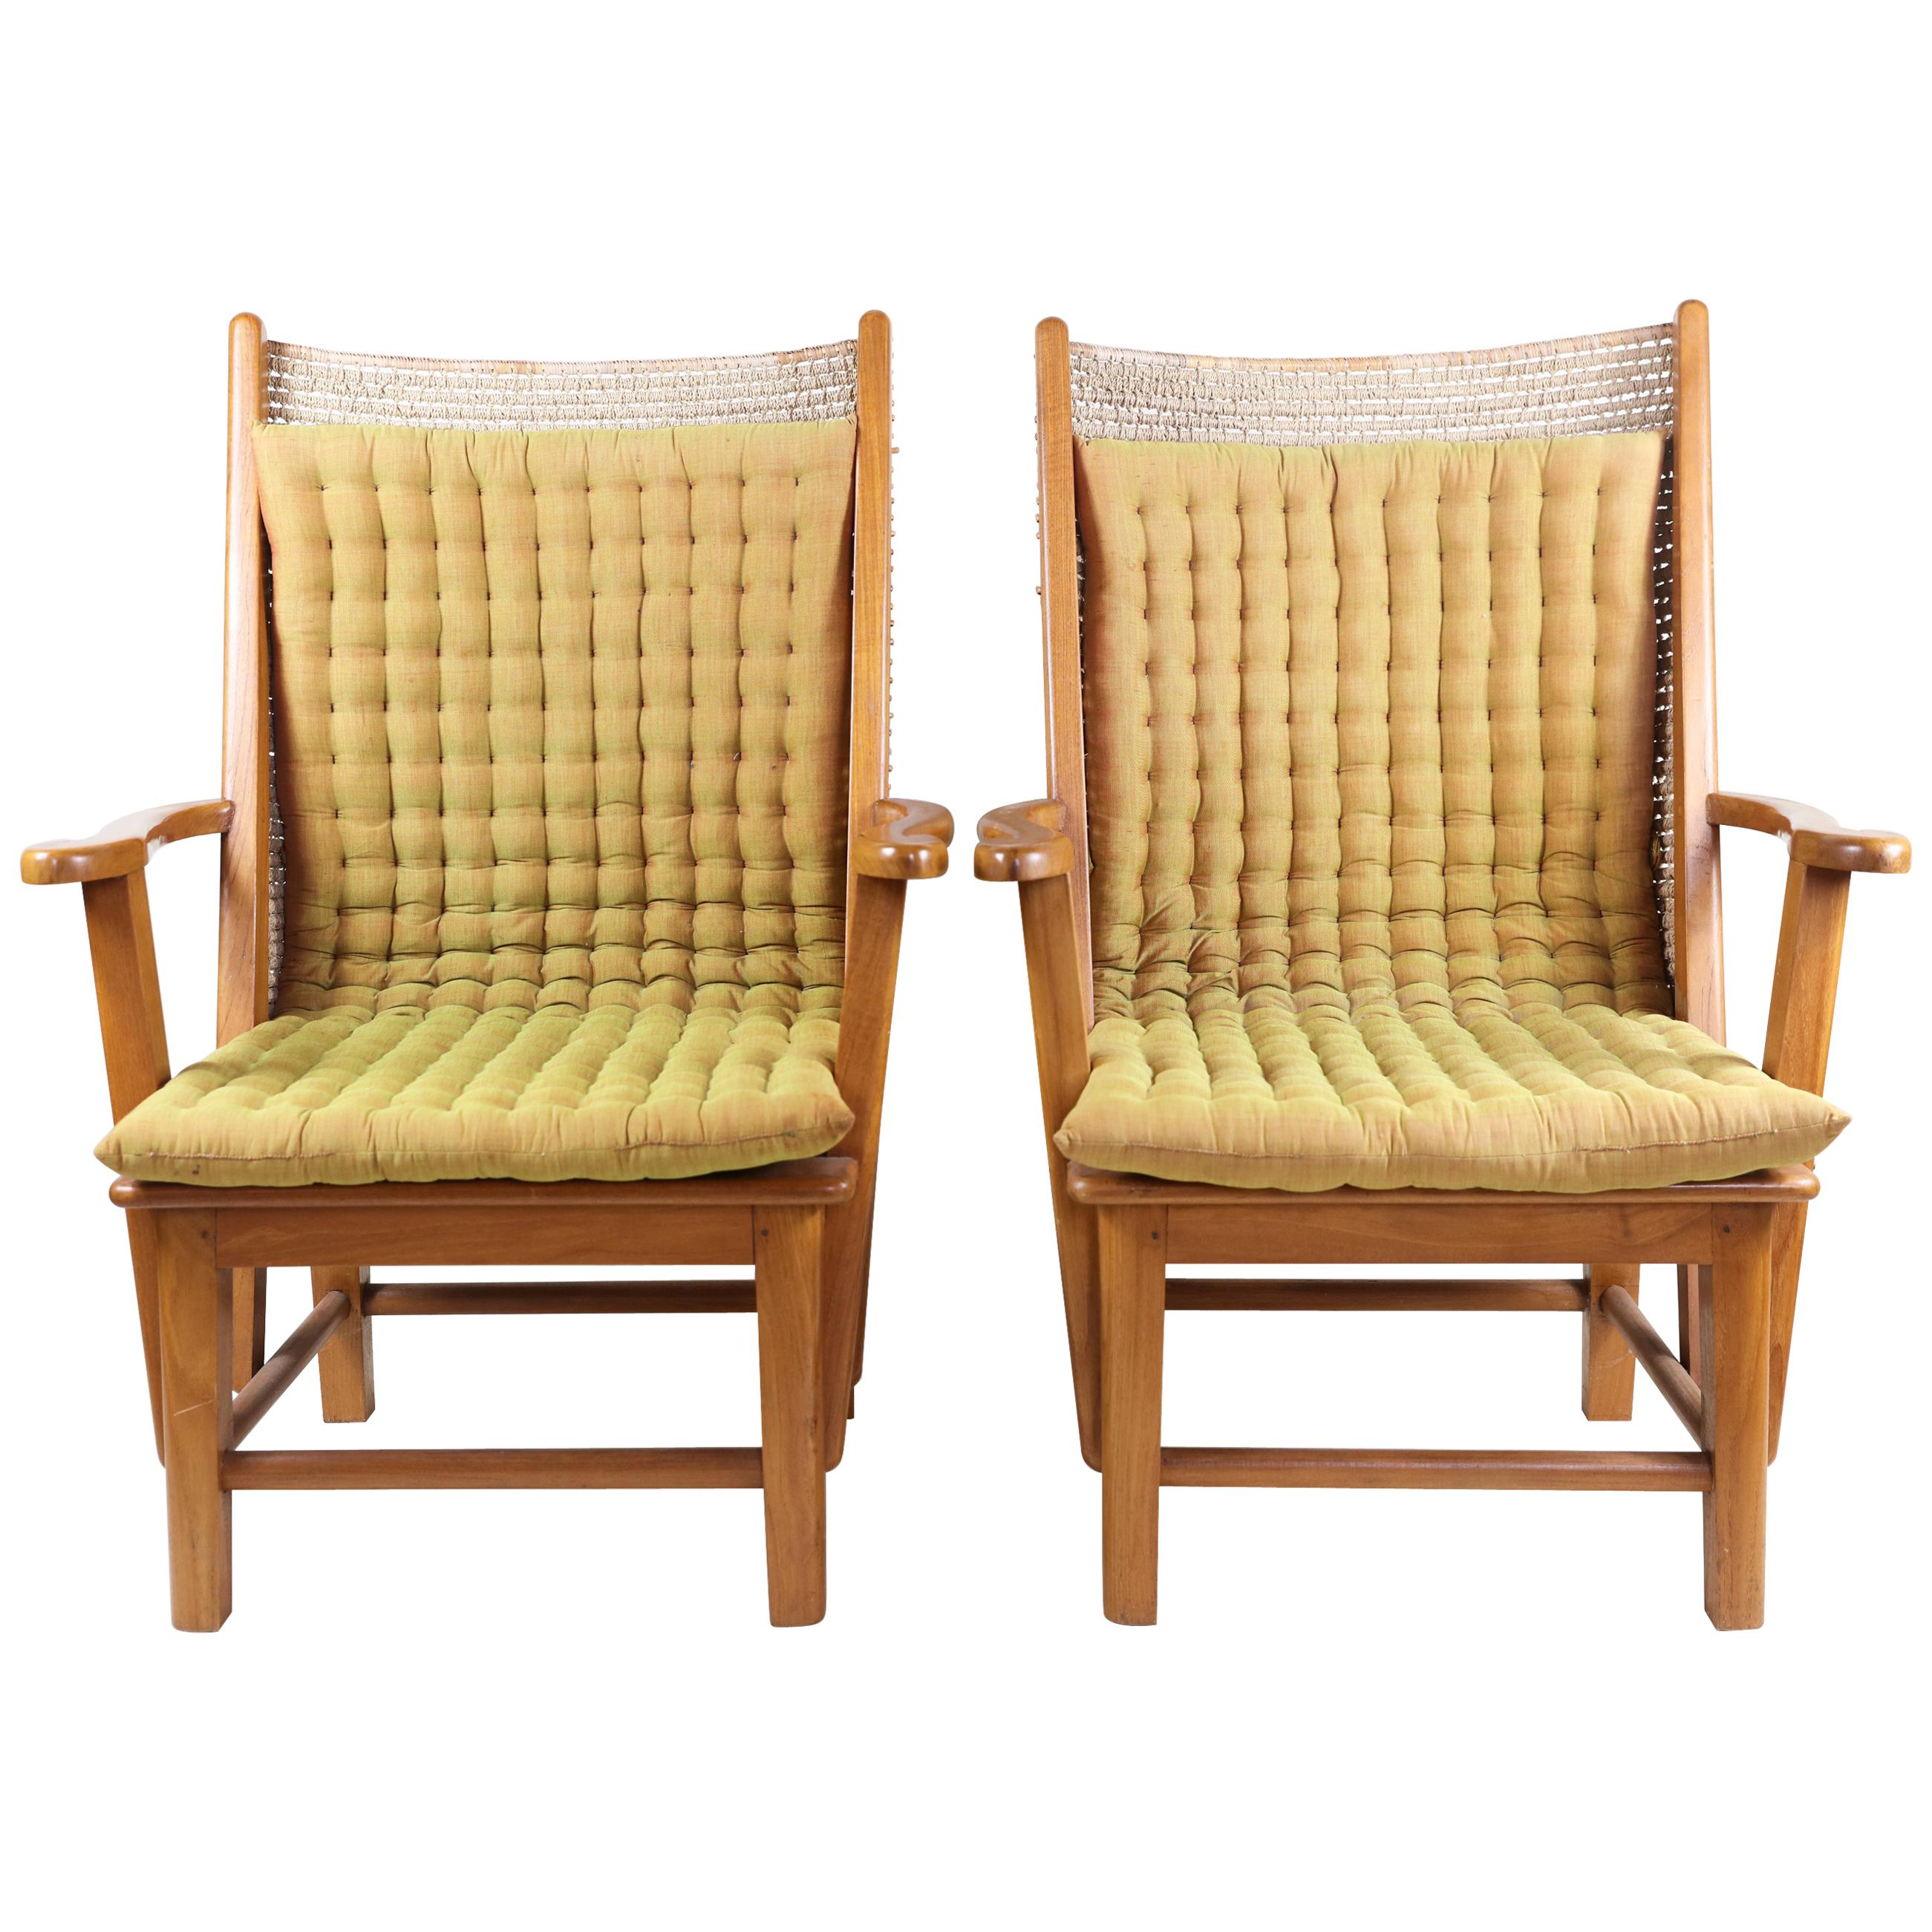 Pair of Woven Jute High Back Chairs with Cushions